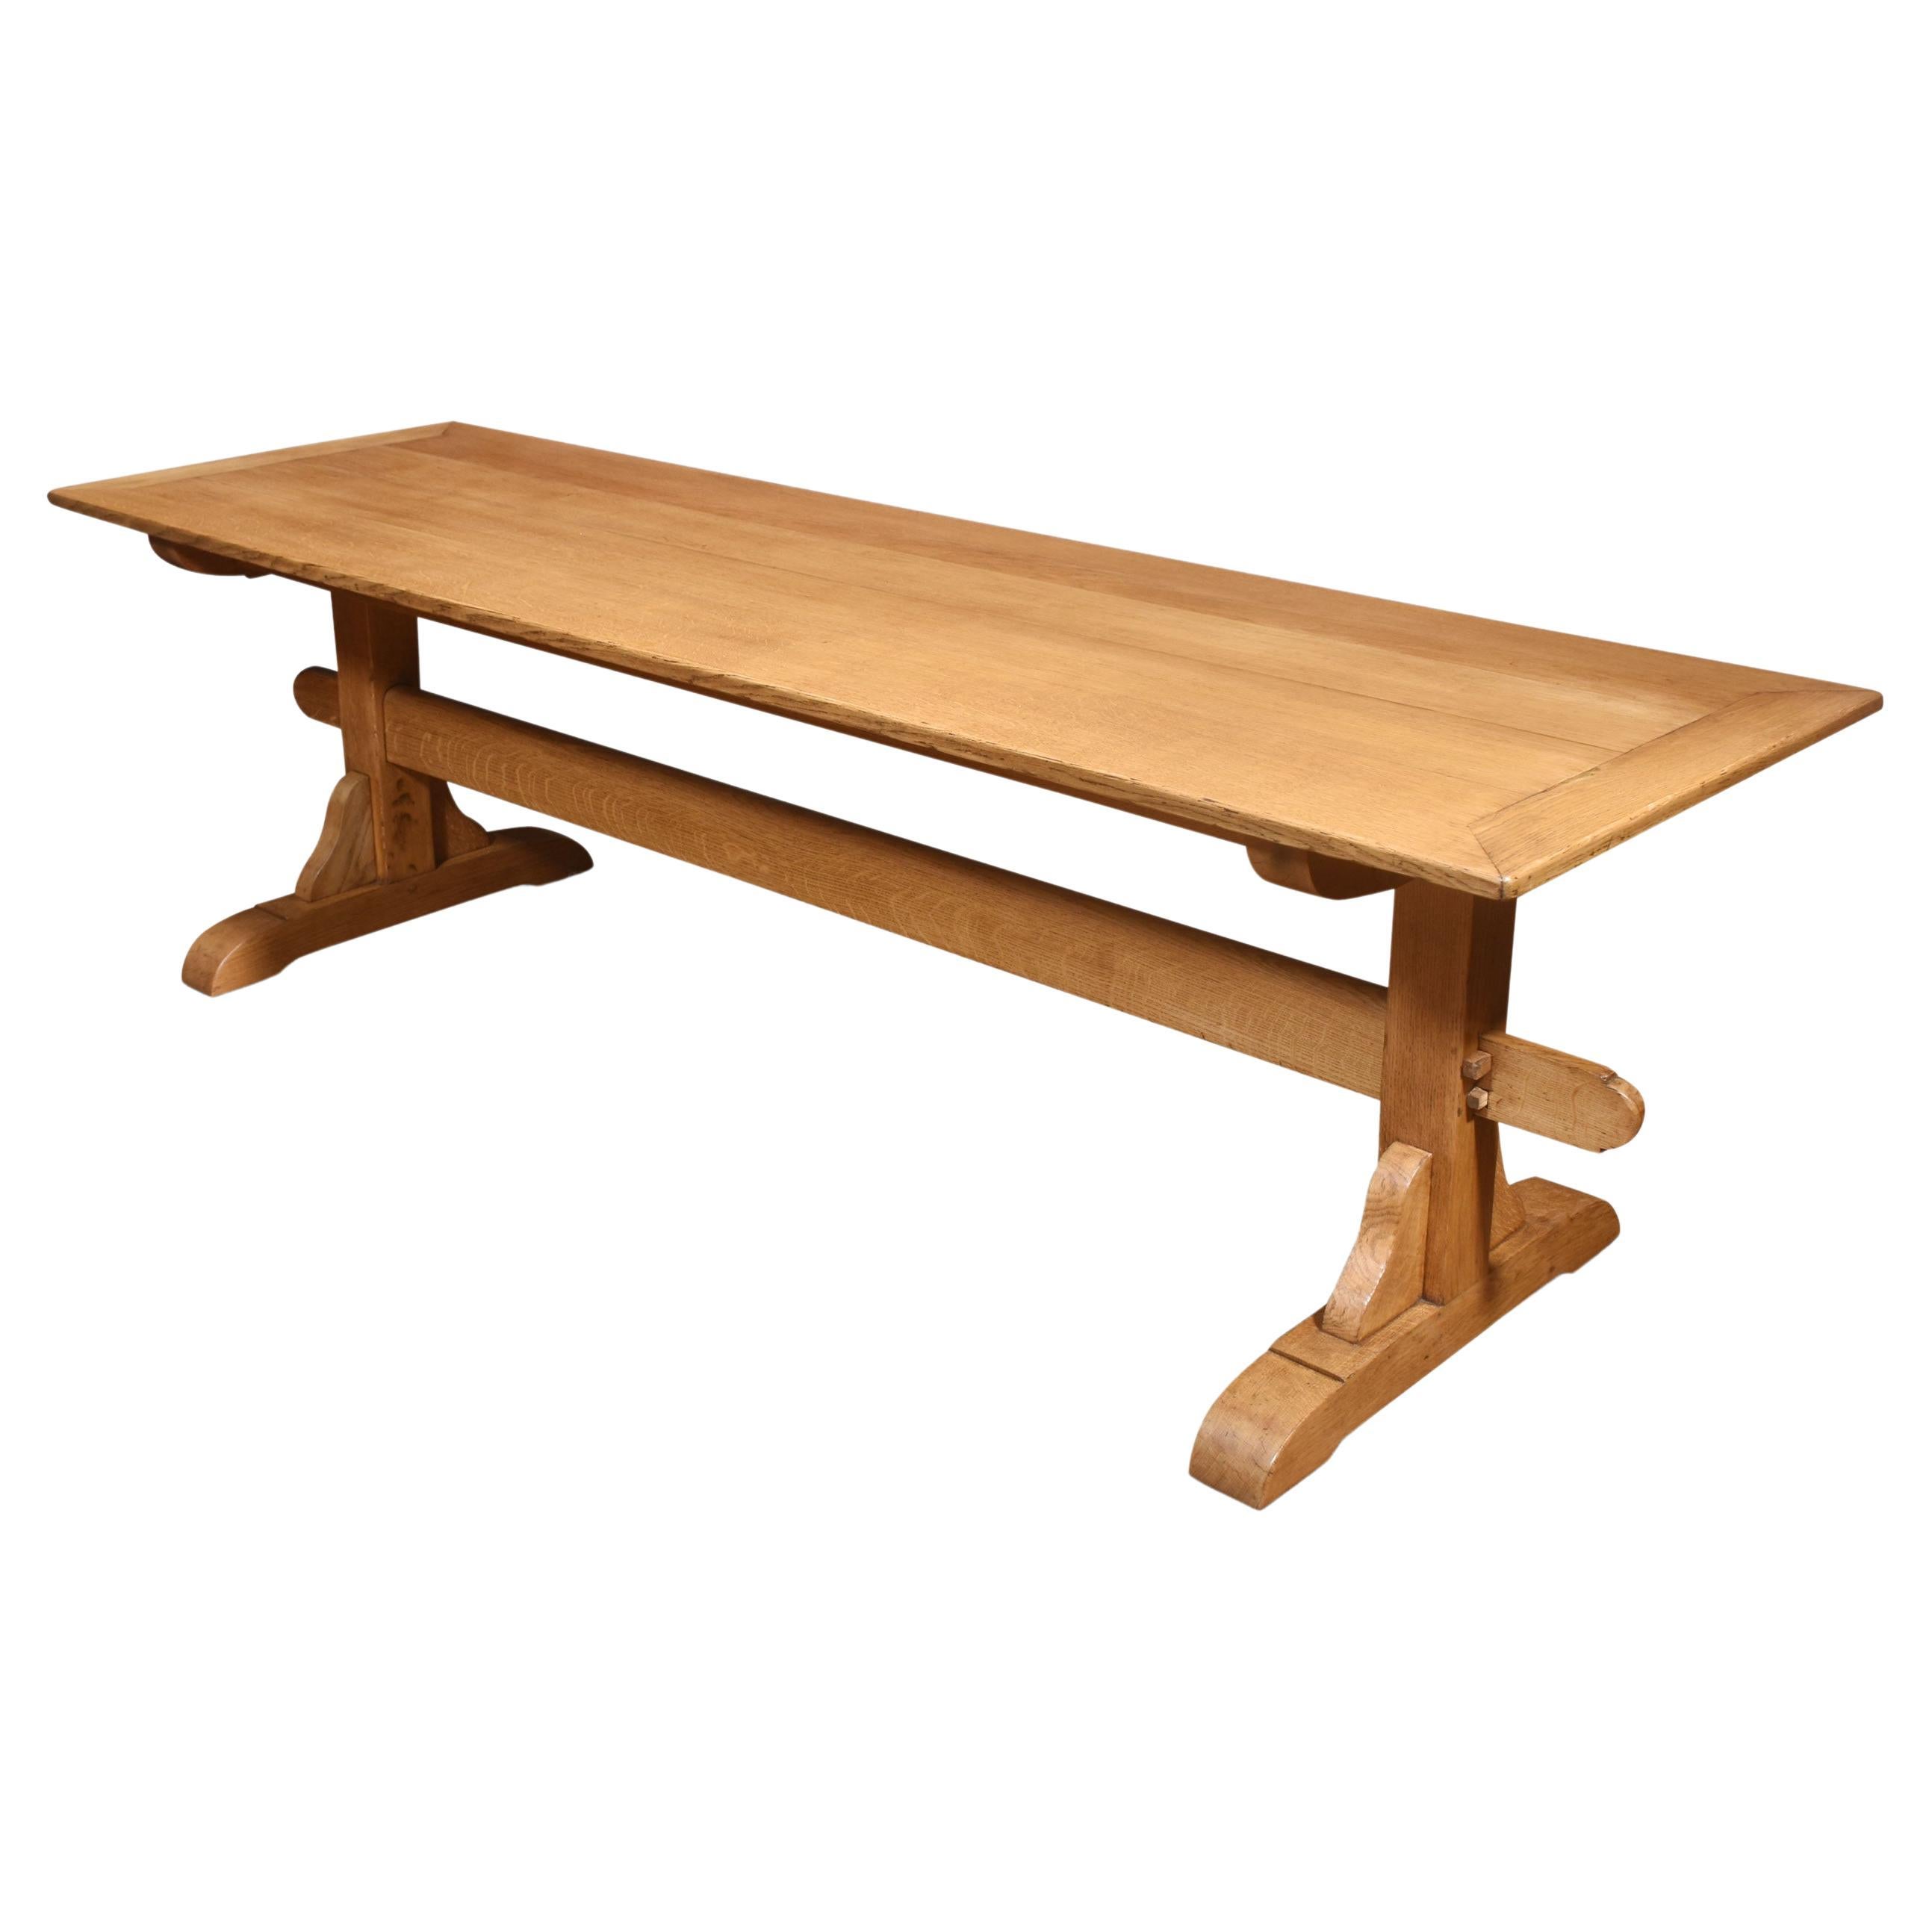 What is the most durable table top?